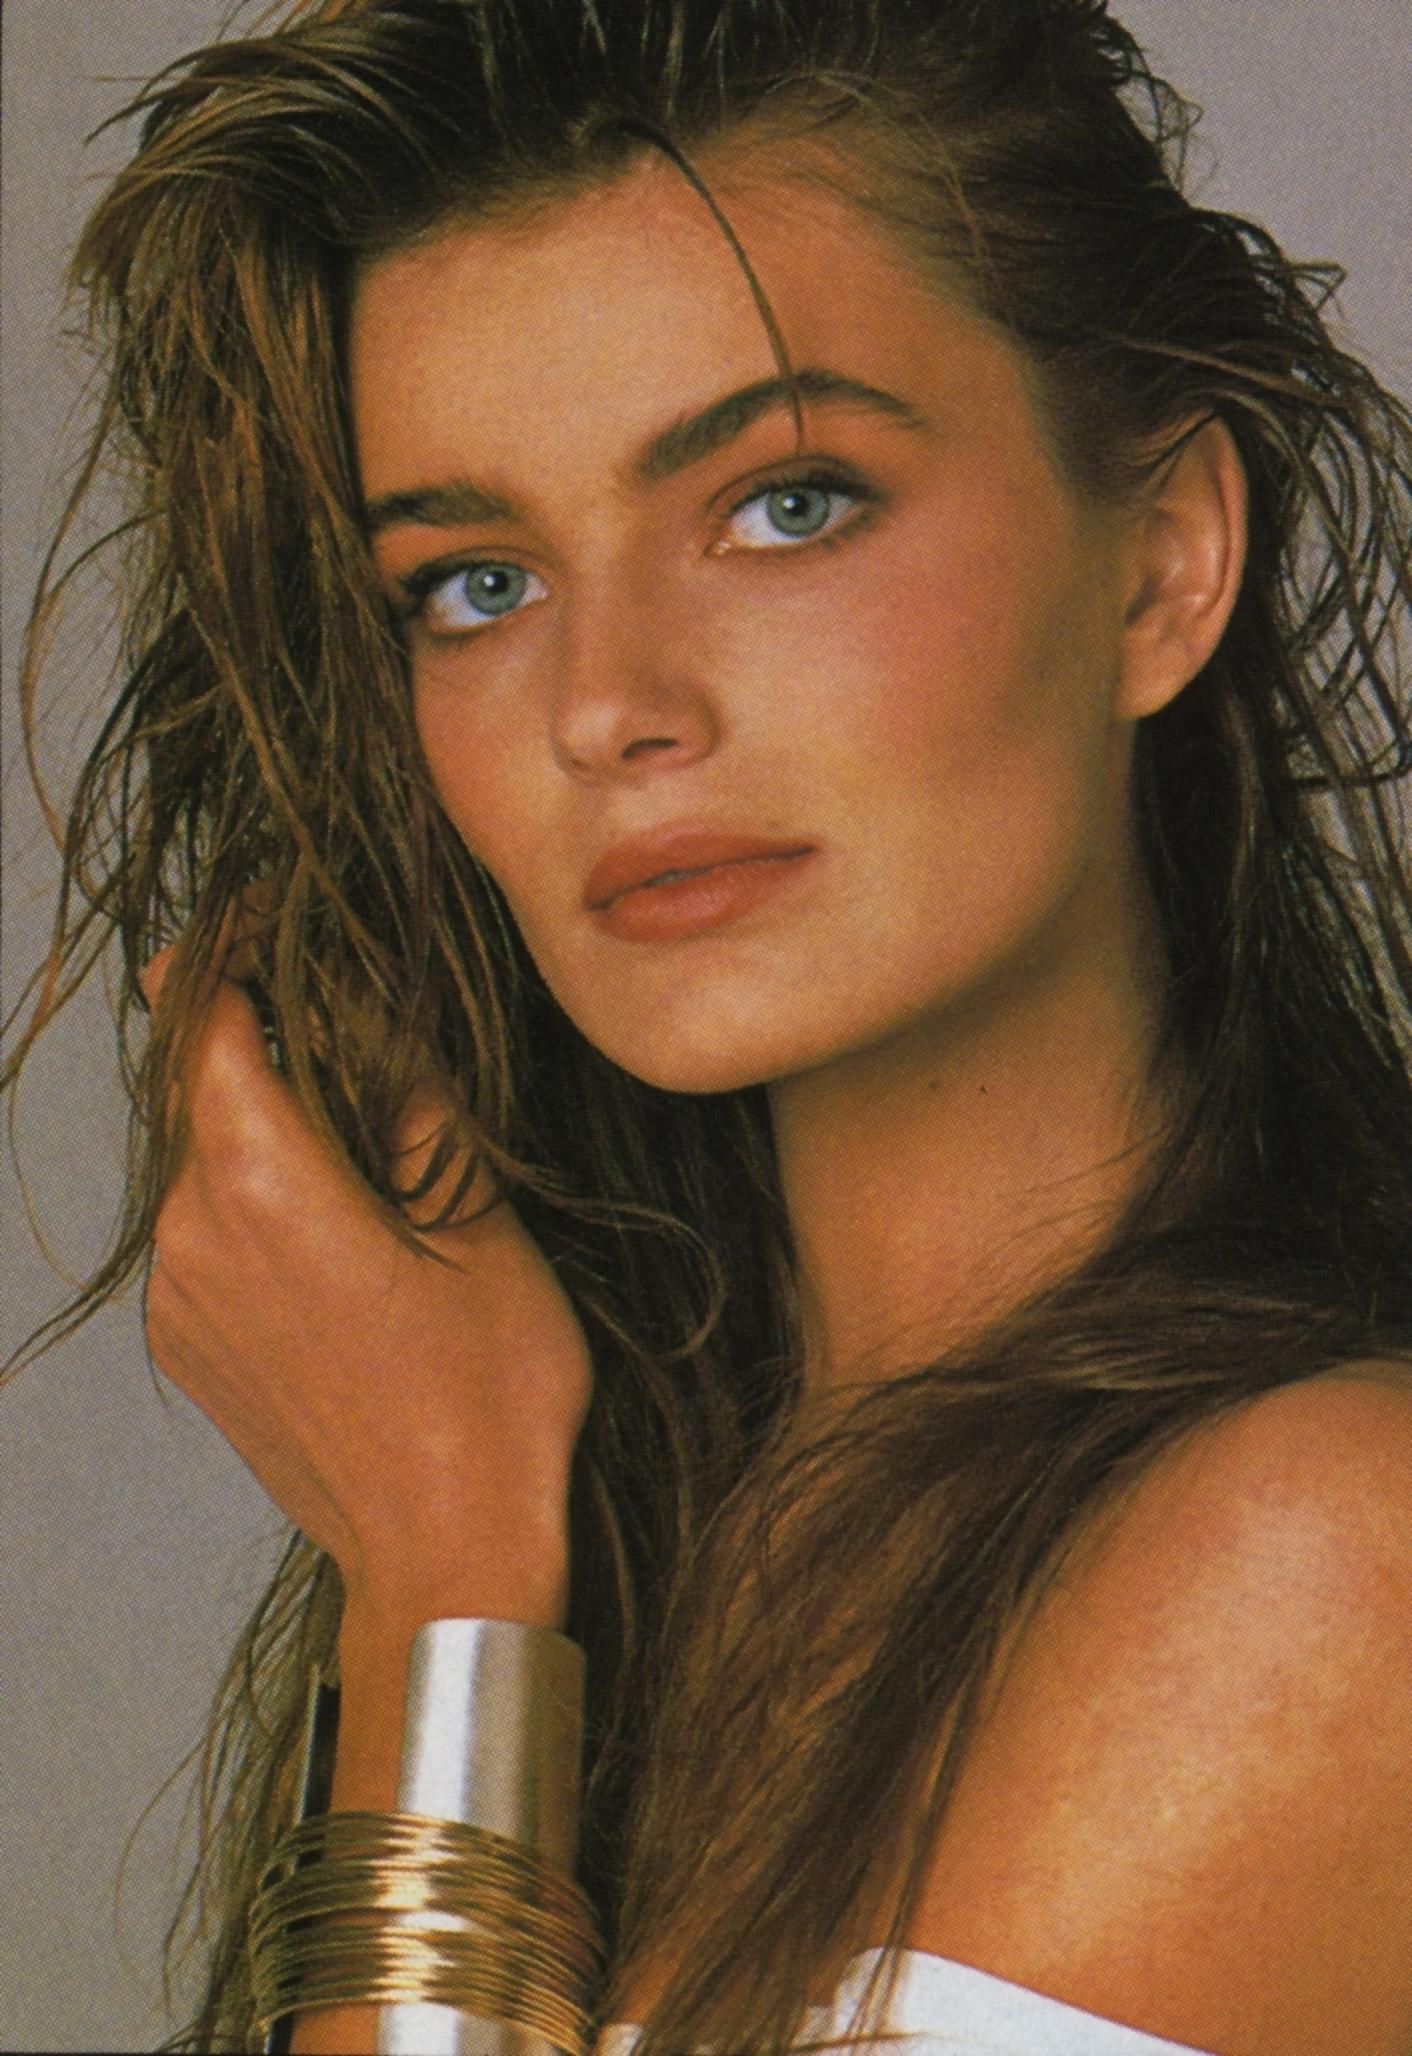 Who was the Hottest Supermodel from the 80's? (facially) - Bodybuilding ...